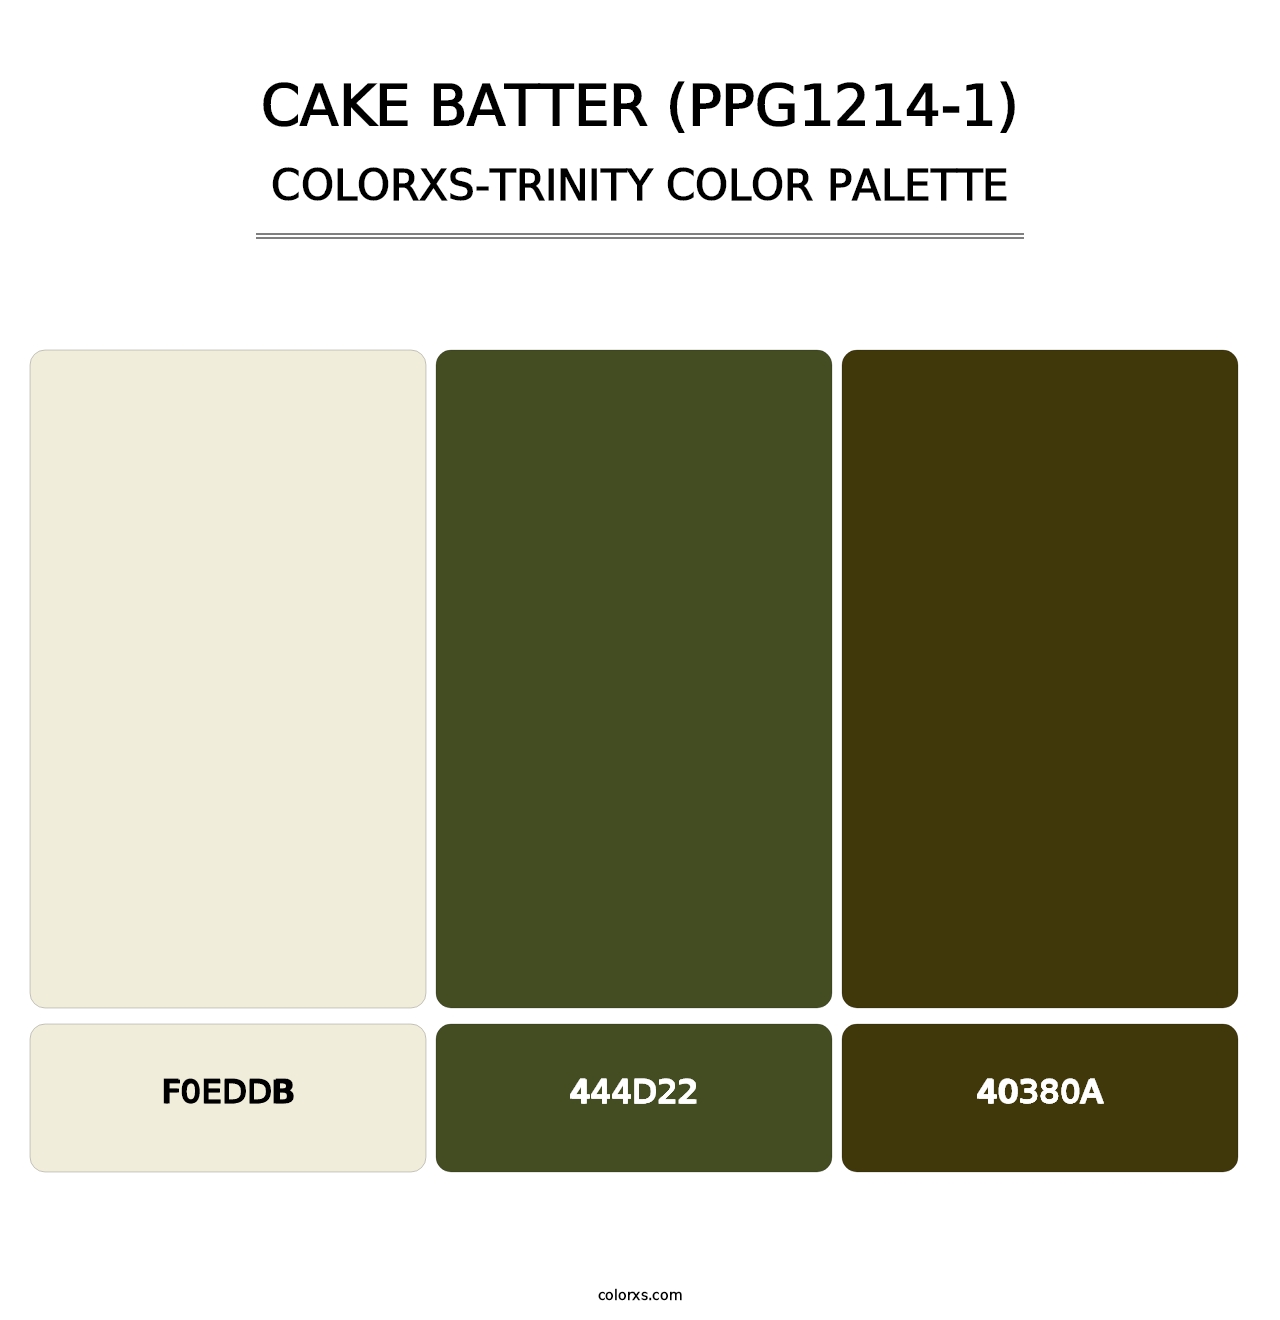 Cake Batter (PPG1214-1) - Colorxs Trinity Palette